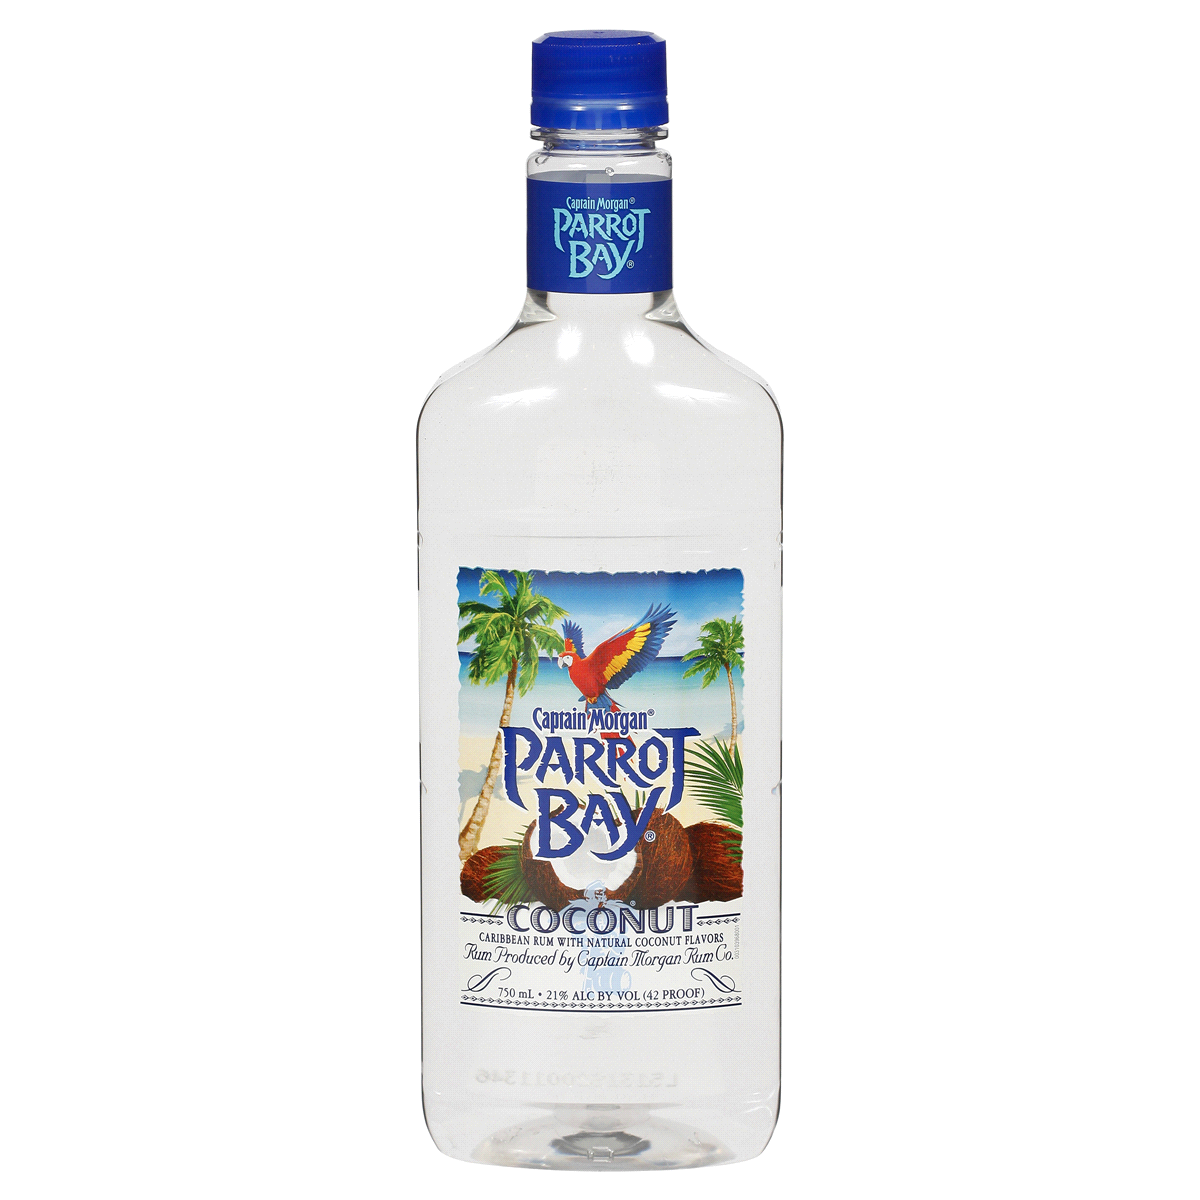 images/wine/SPIRITAS and OTHERS/Captain Morgan Parrot Bay Coconut Rum.png